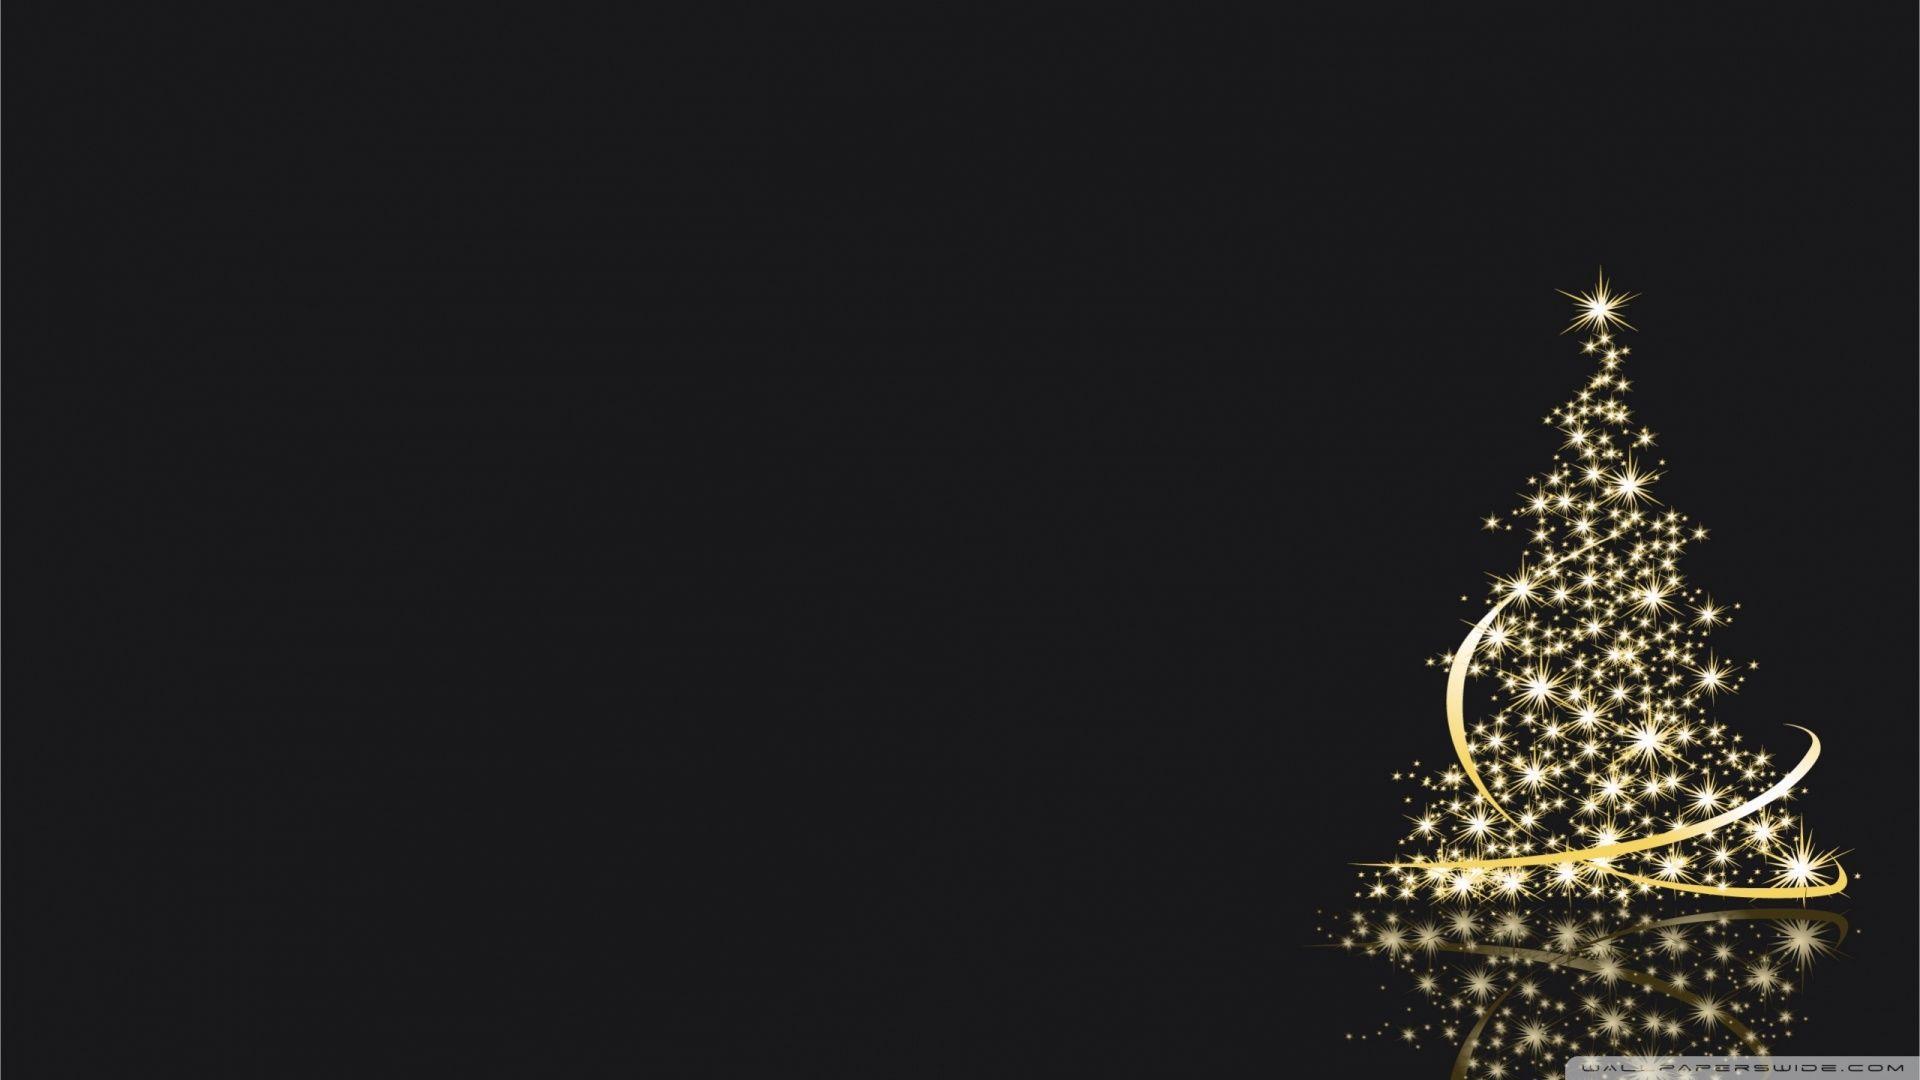 Christmas tree Wallpaper and Desktop Background. Download